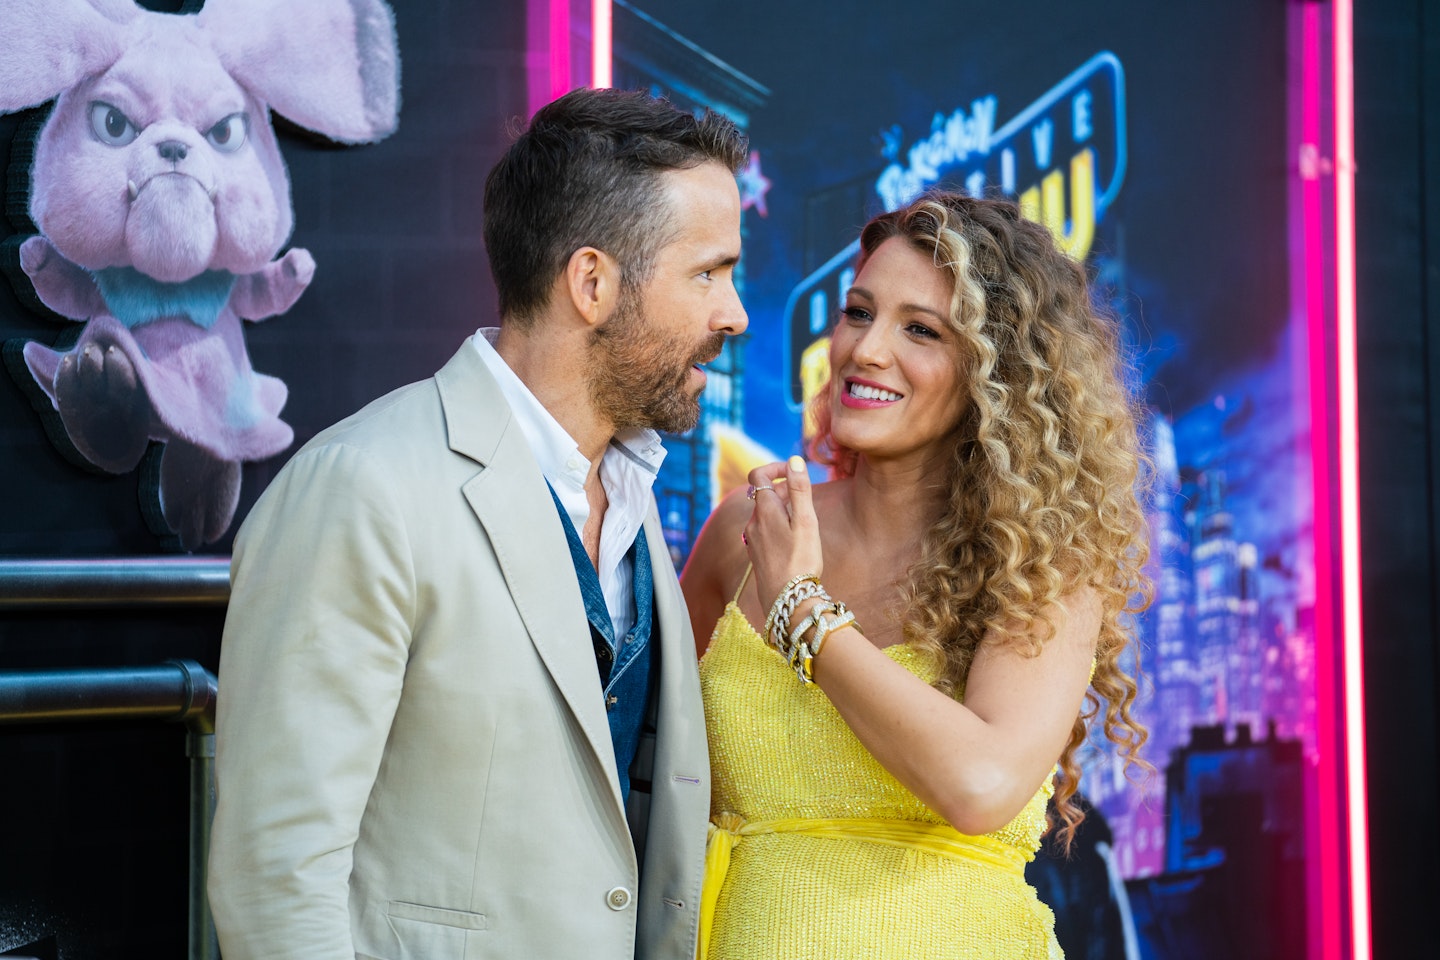 Blake Lively and Ryan Reynolds attend the premiere of "Pokemon Detective Pikachu" at Military Island in Times Square on May 2, 2019 in New York City